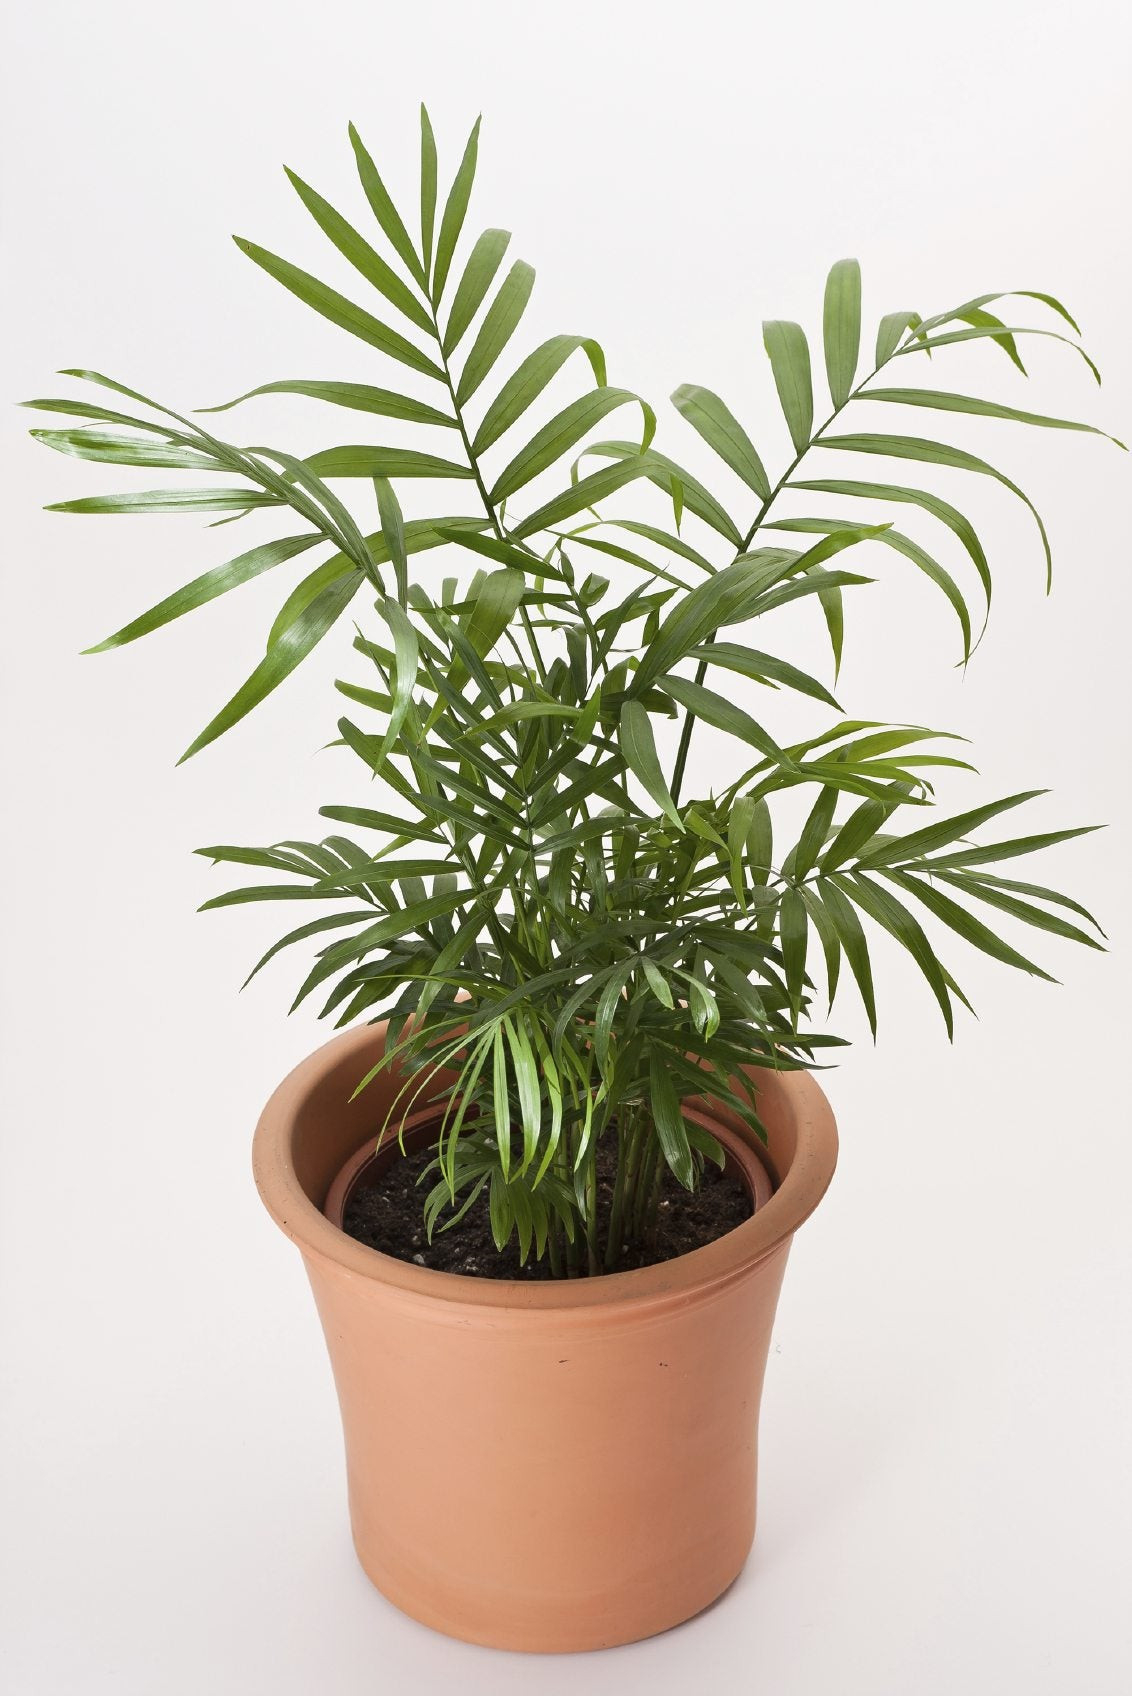 Parlor Palm Houseplant Care - Caring For Indoor Parlor Palm Plants